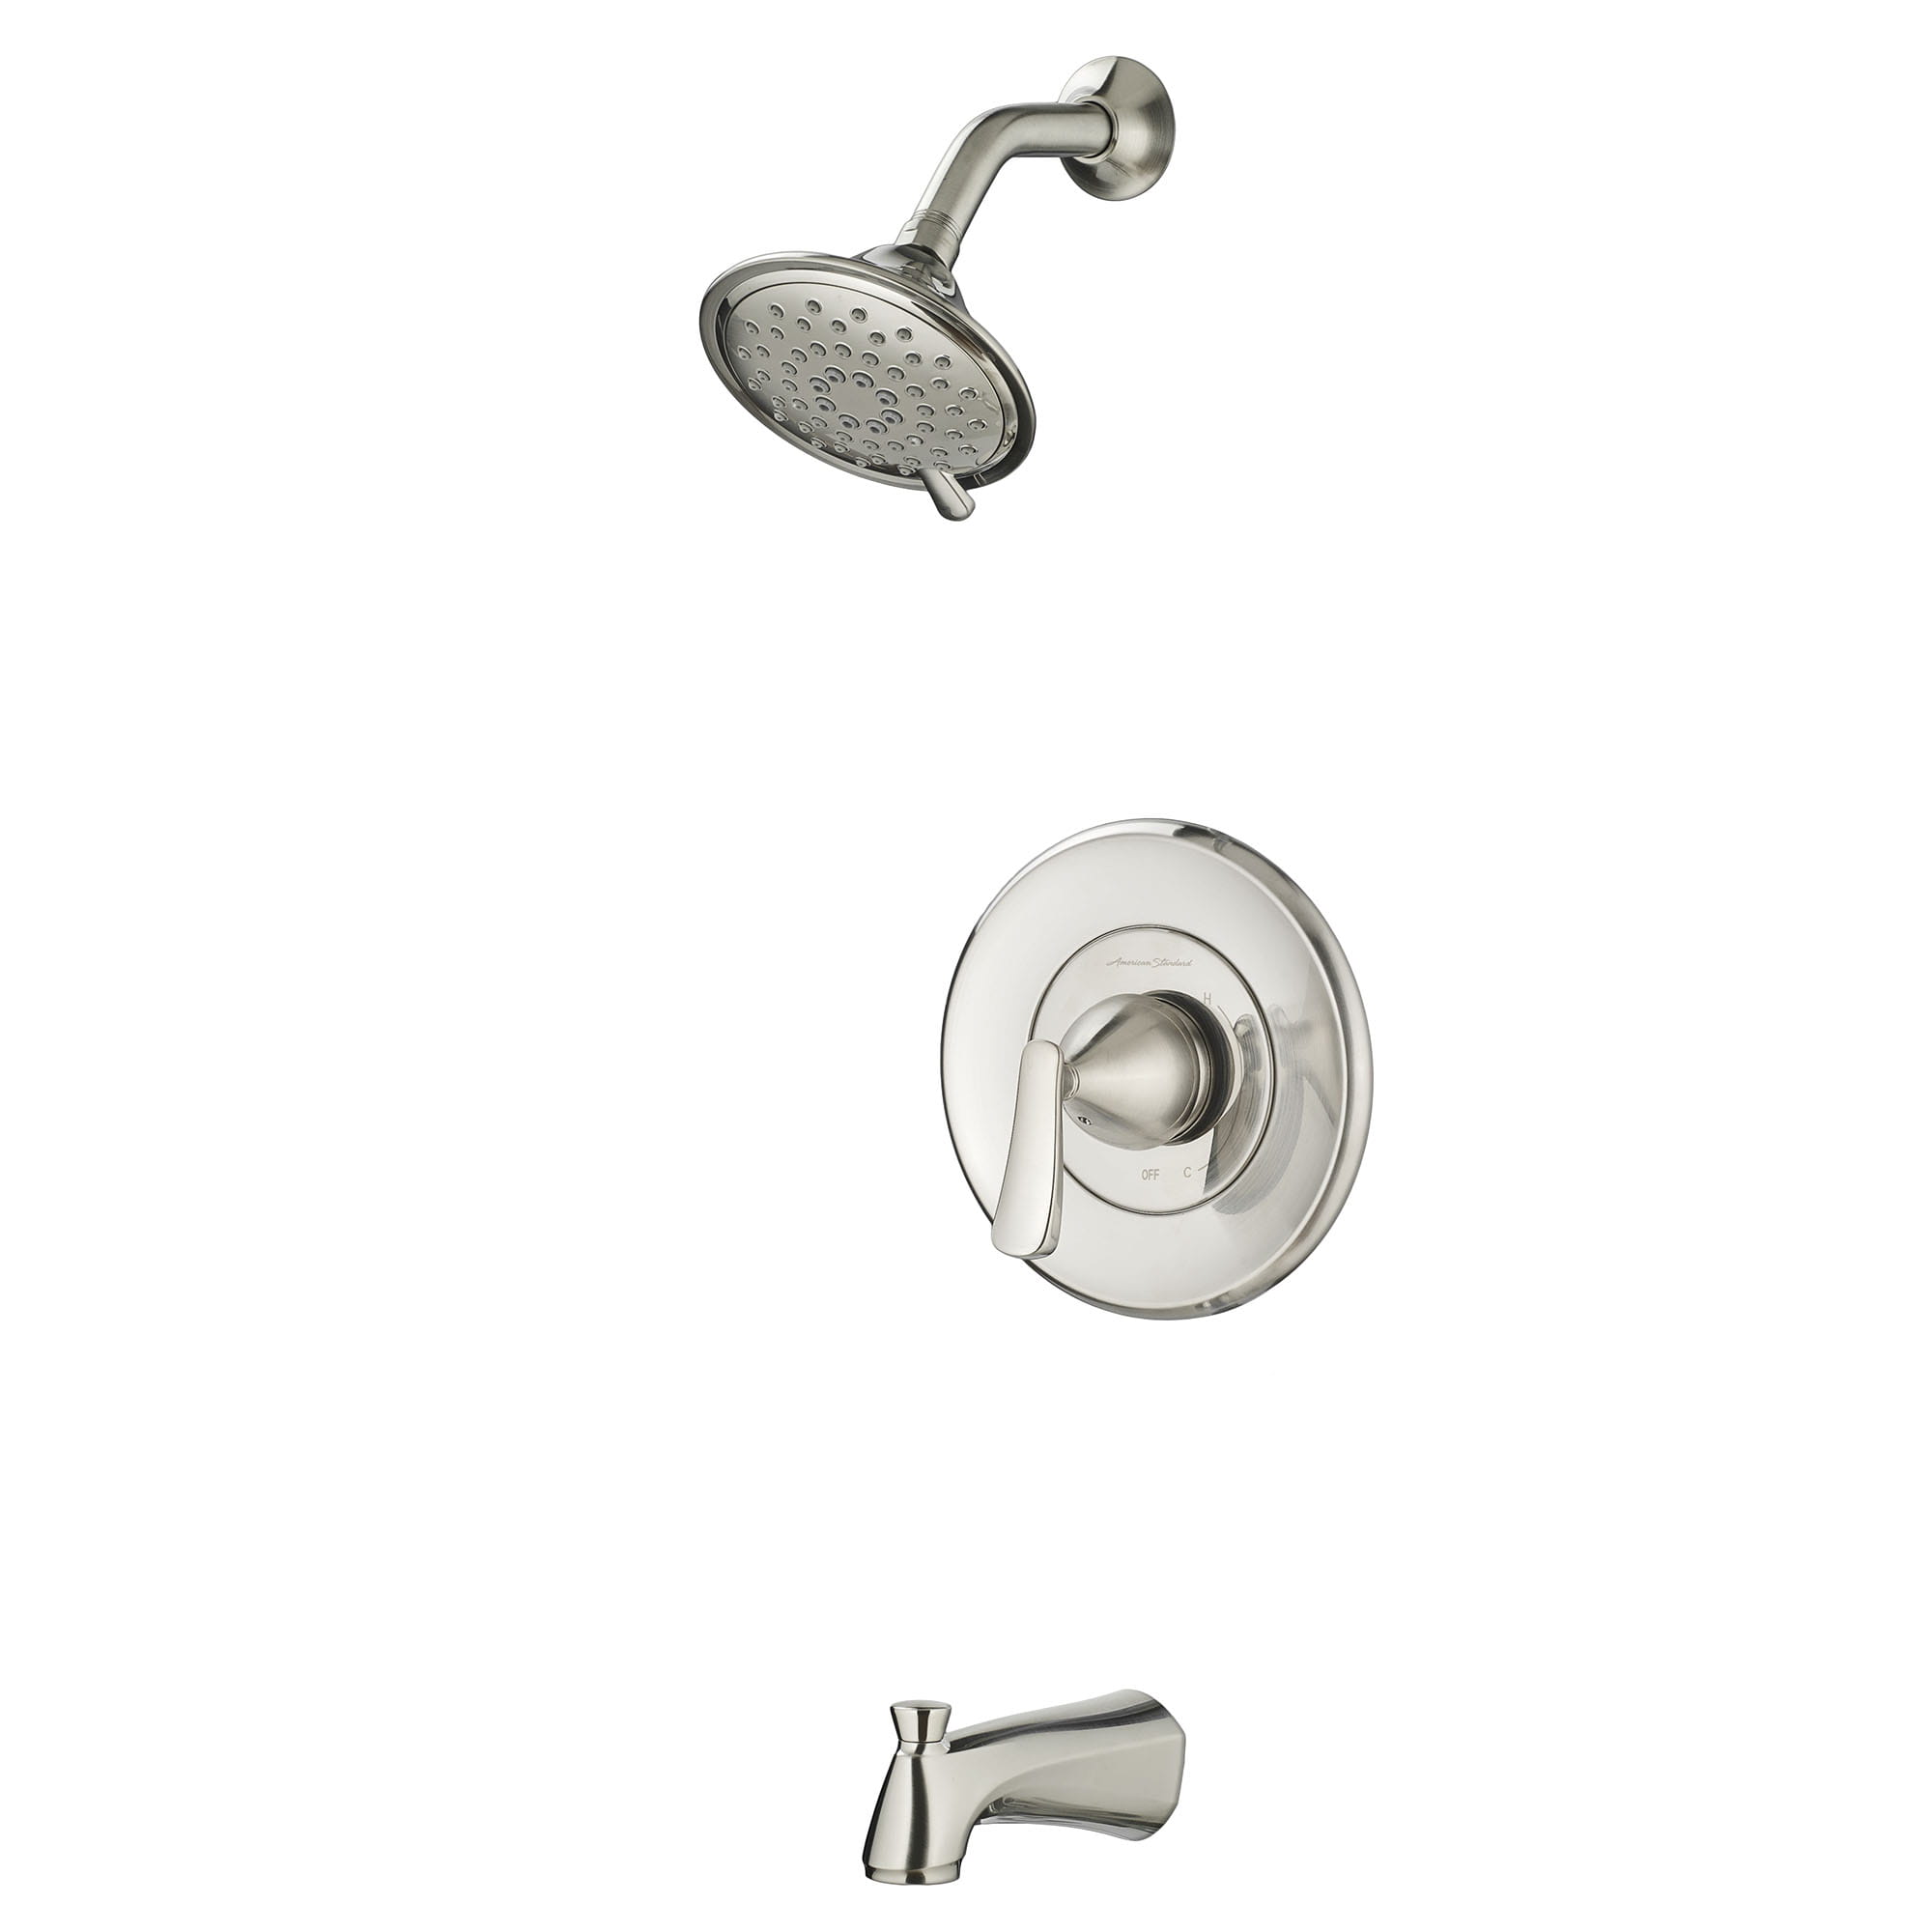 Chatfield 20 GPM Tub and Shower Trim Kit with 3 Function Showerhead Ceramic Disc Valve Cartridge with Lever Handle   BRUSHED NICKEL